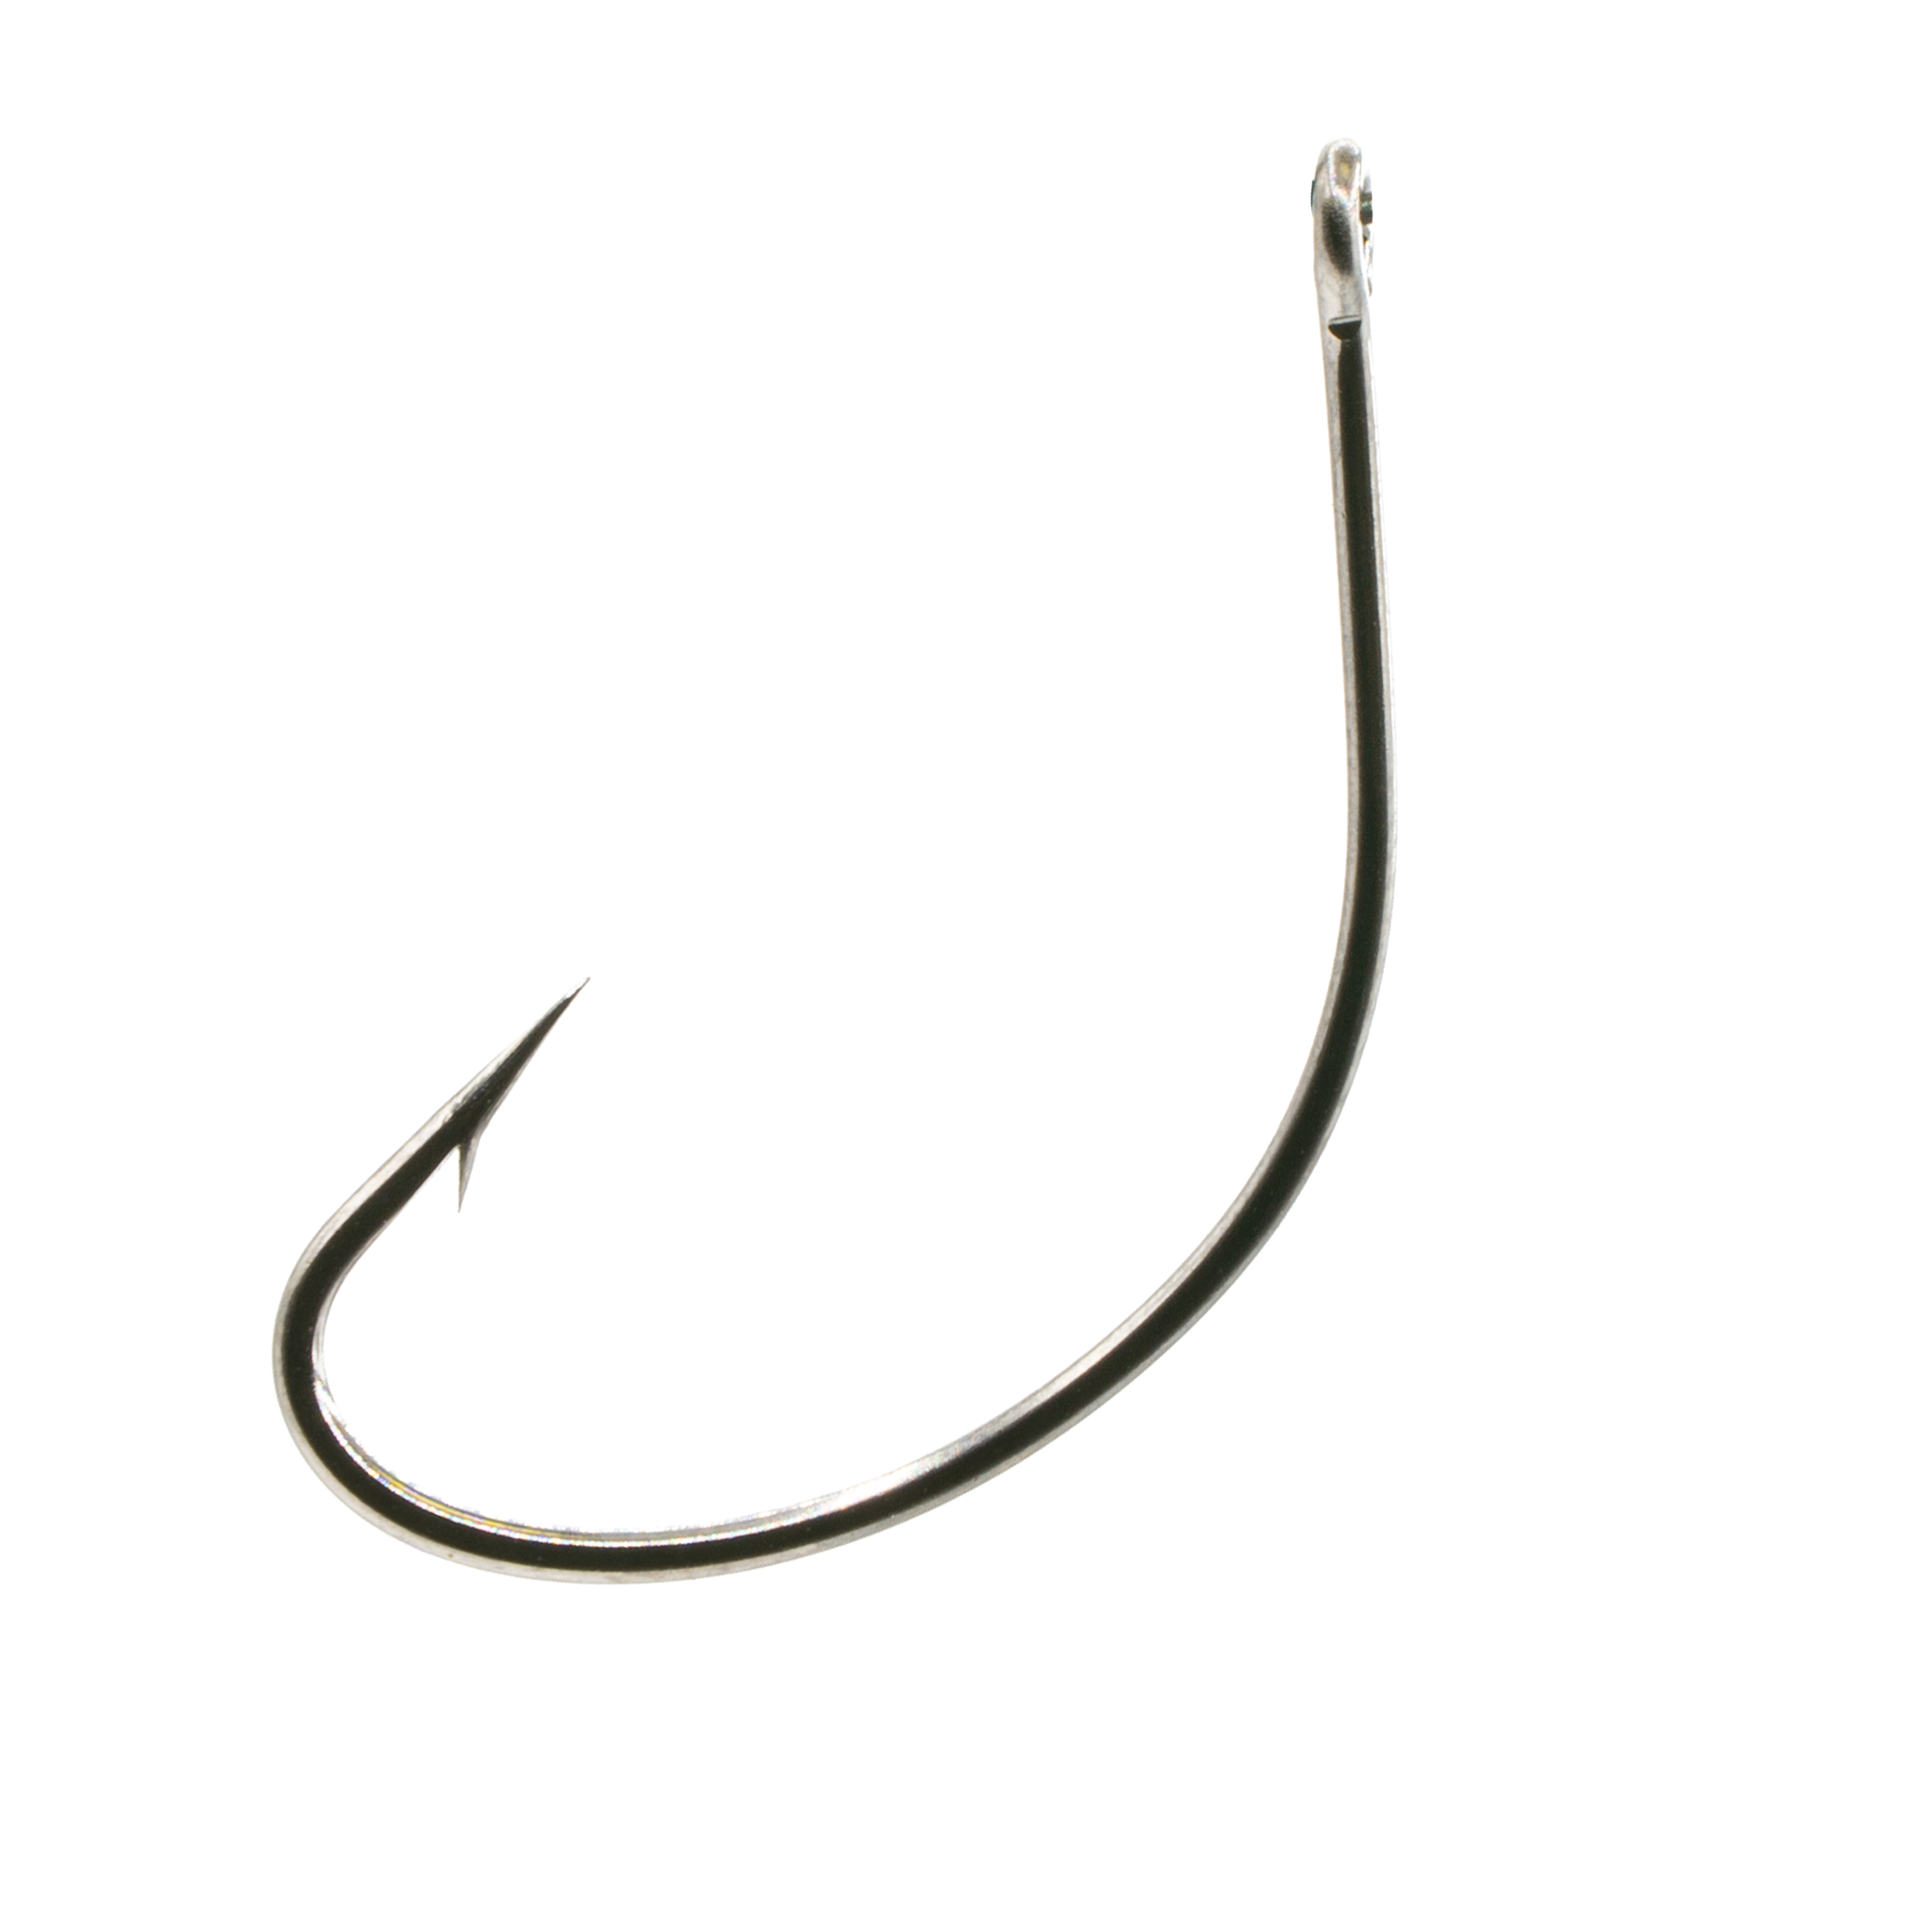 Shop High-Quality Fishing Terminal Tackle Accessories at Ubuy Bhutan